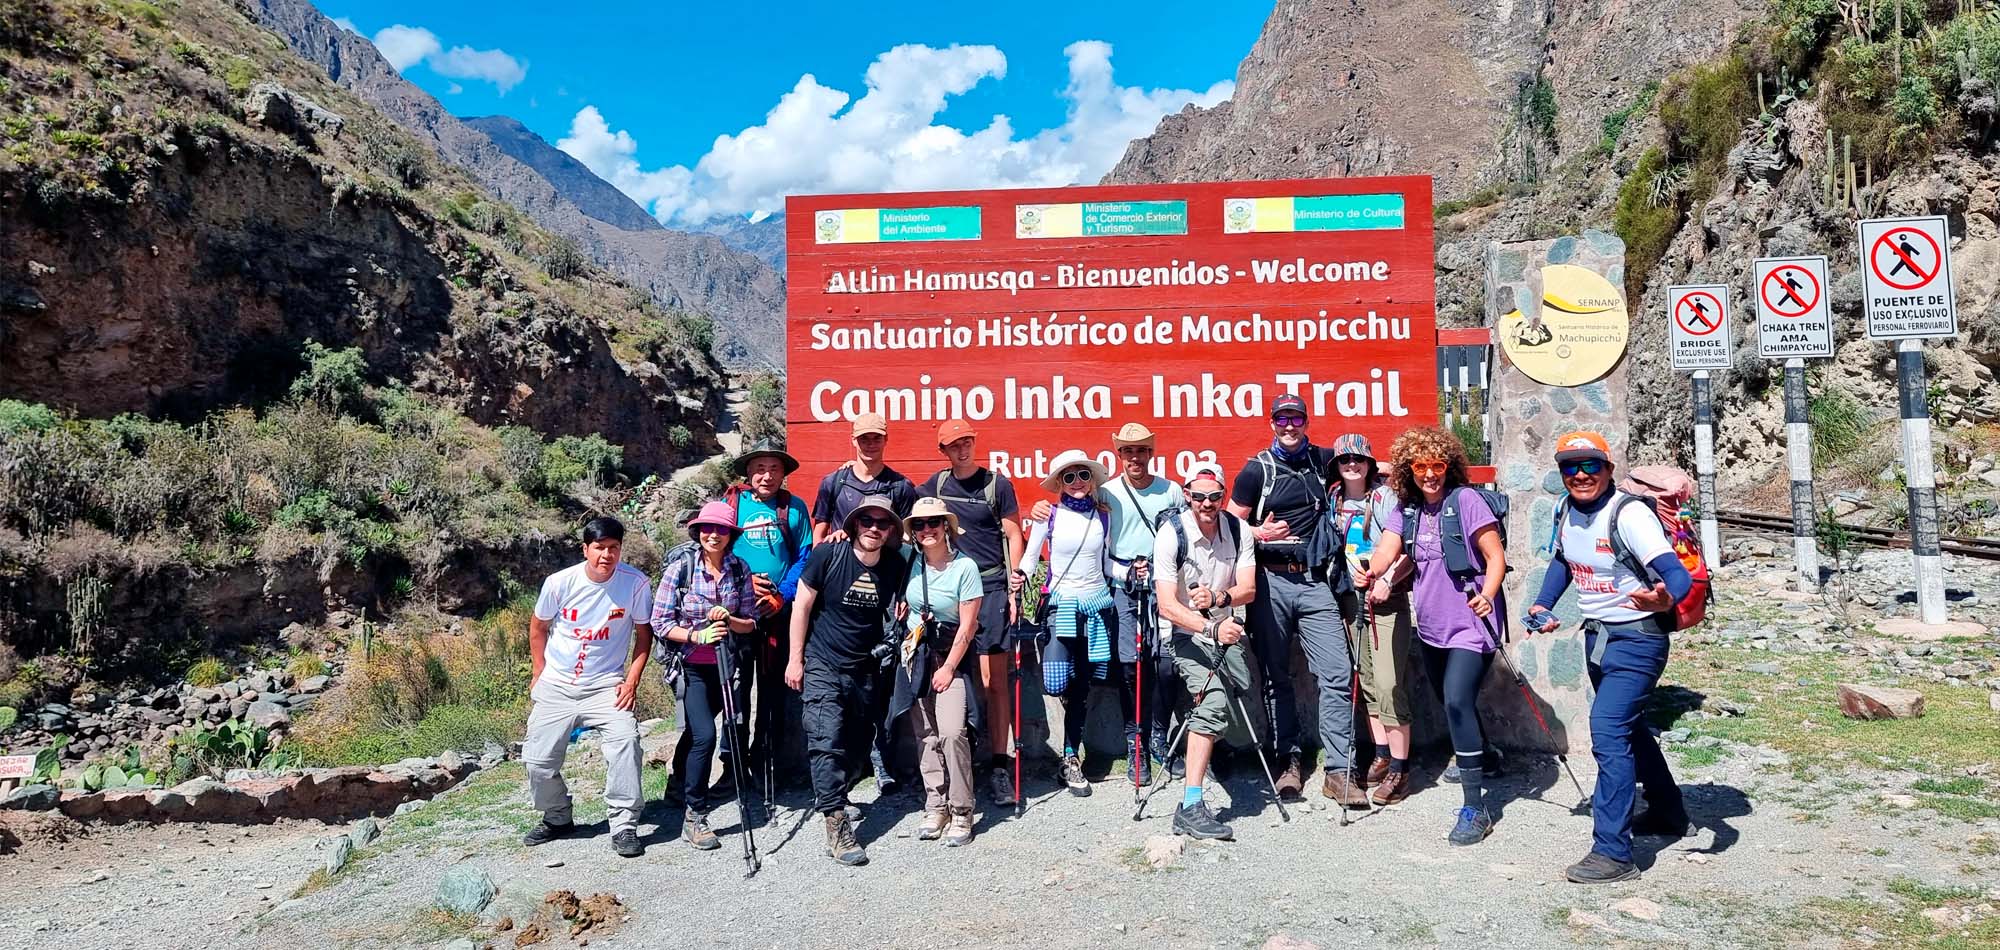 Everything You Need To Know About Hiking The Short Inca Trail in Peru